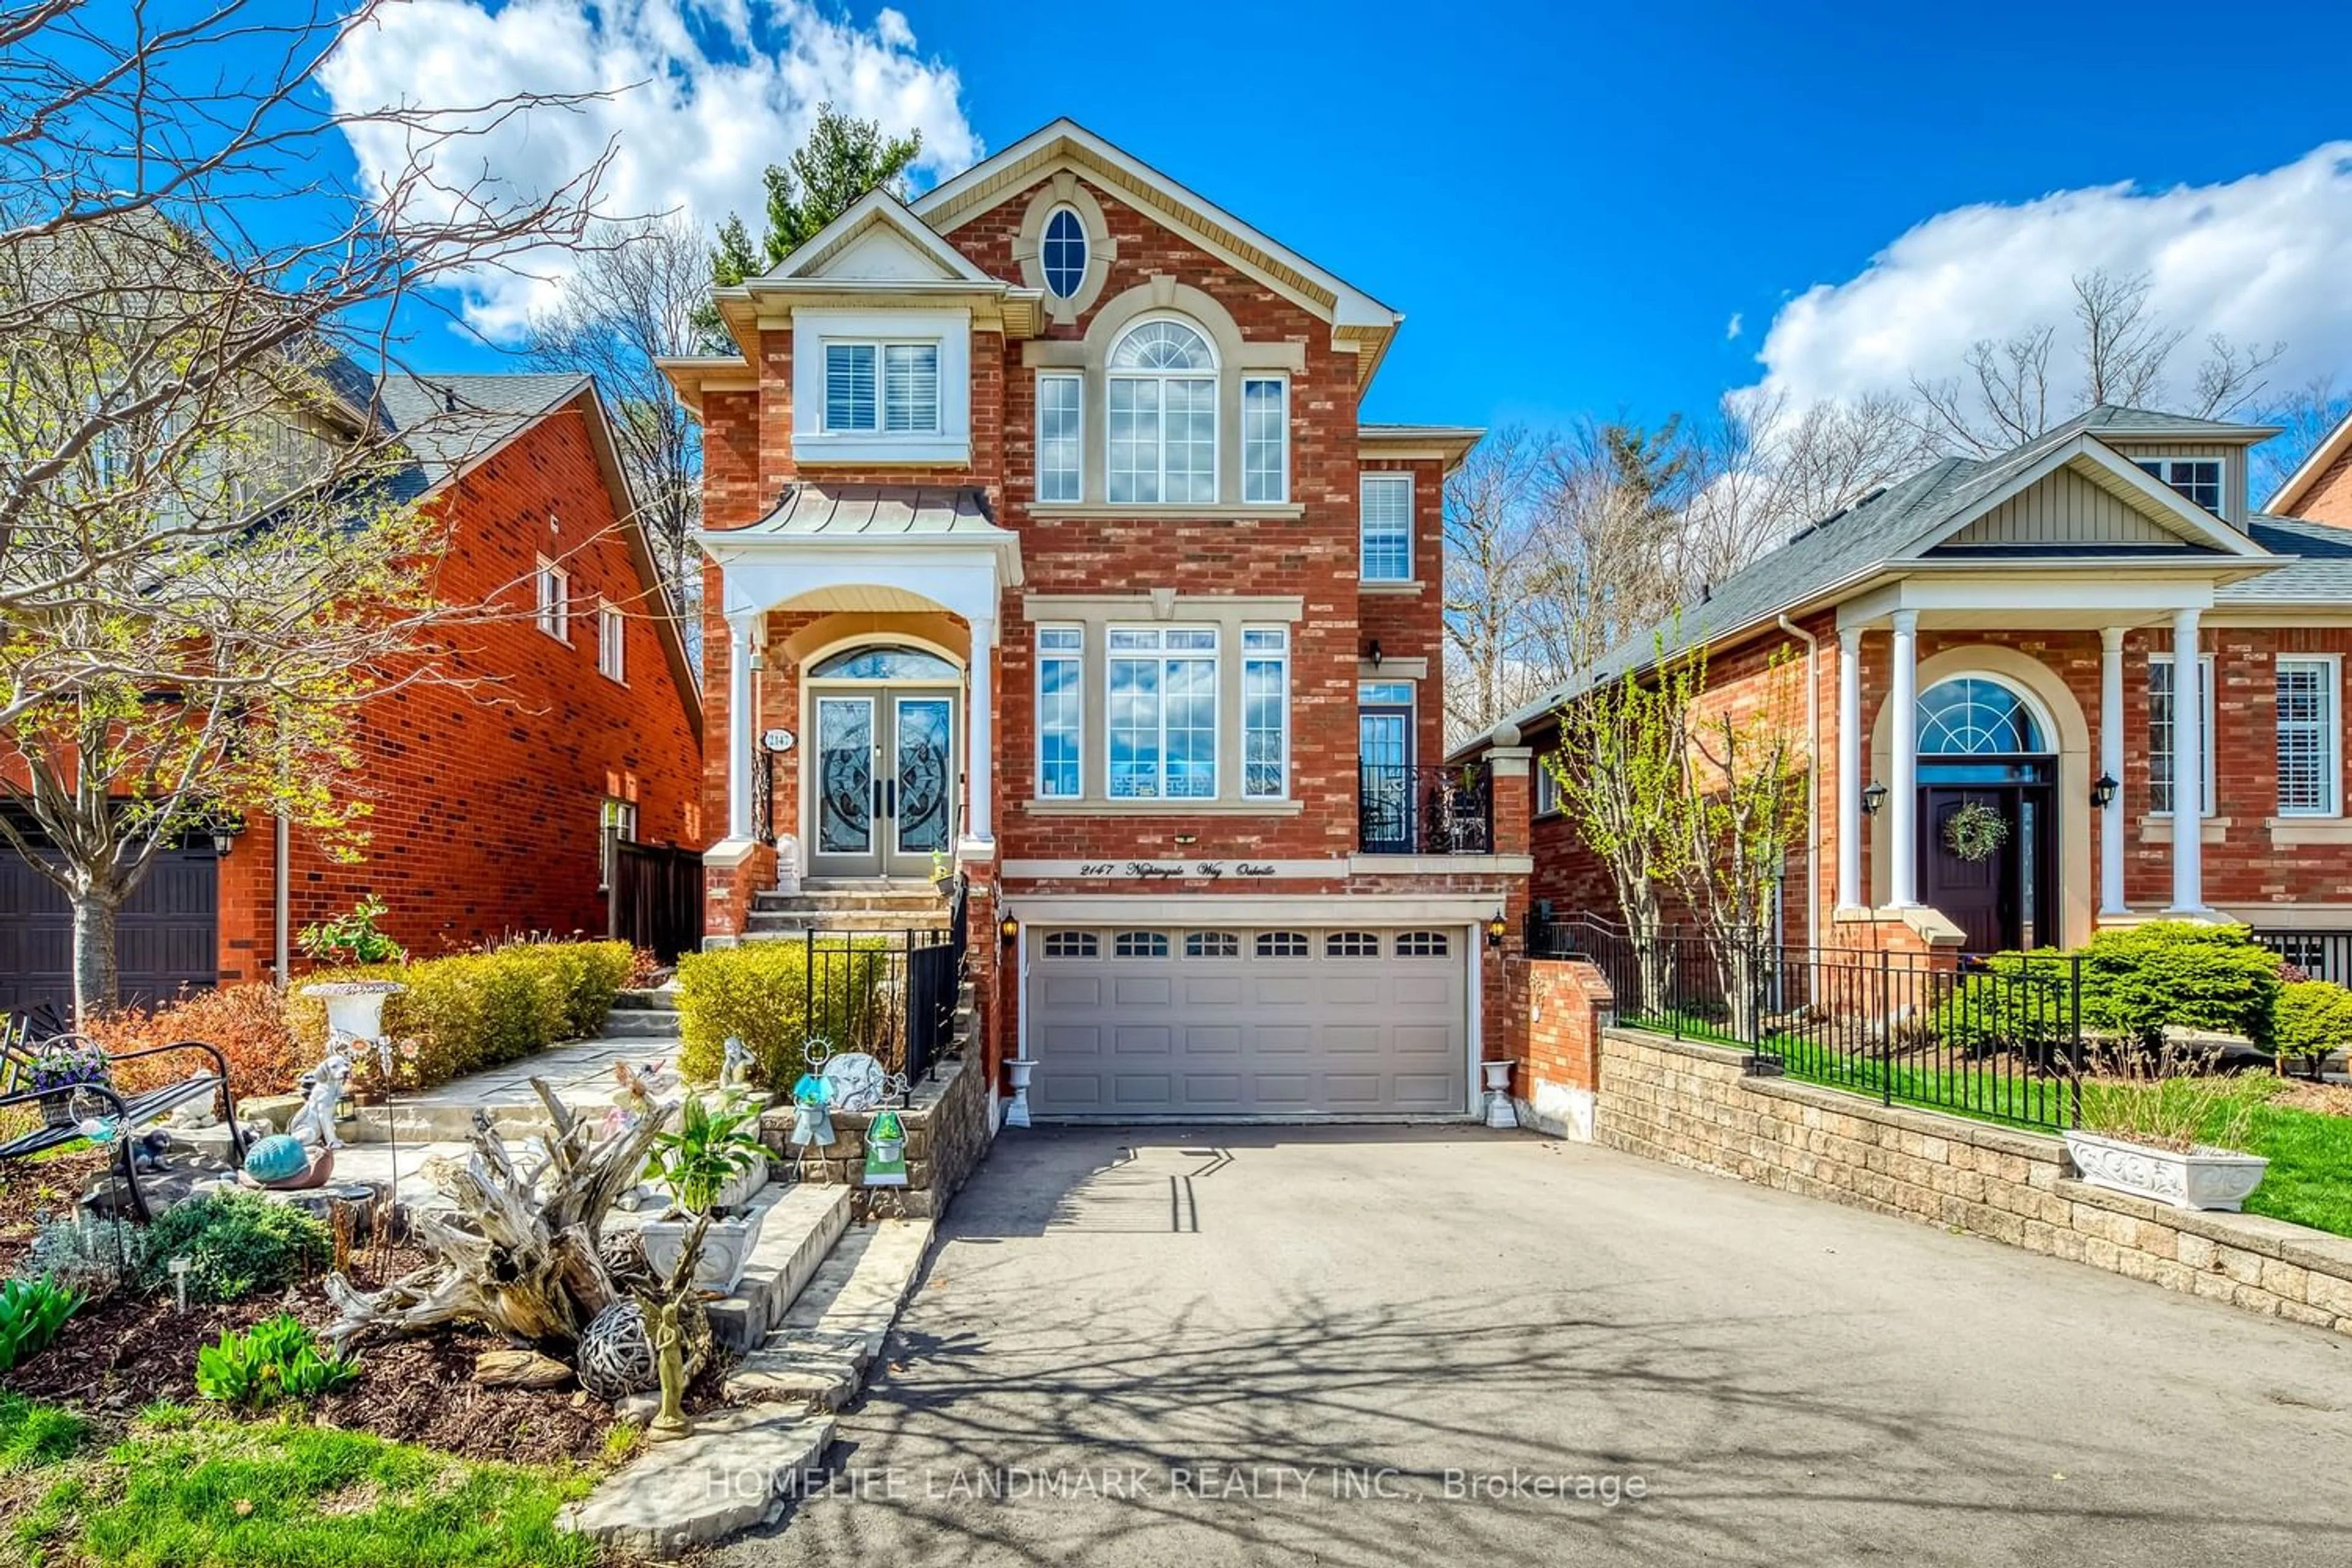 Home with brick exterior material for 2147 Nightingale Way, Oakville Ontario L6M 3R9